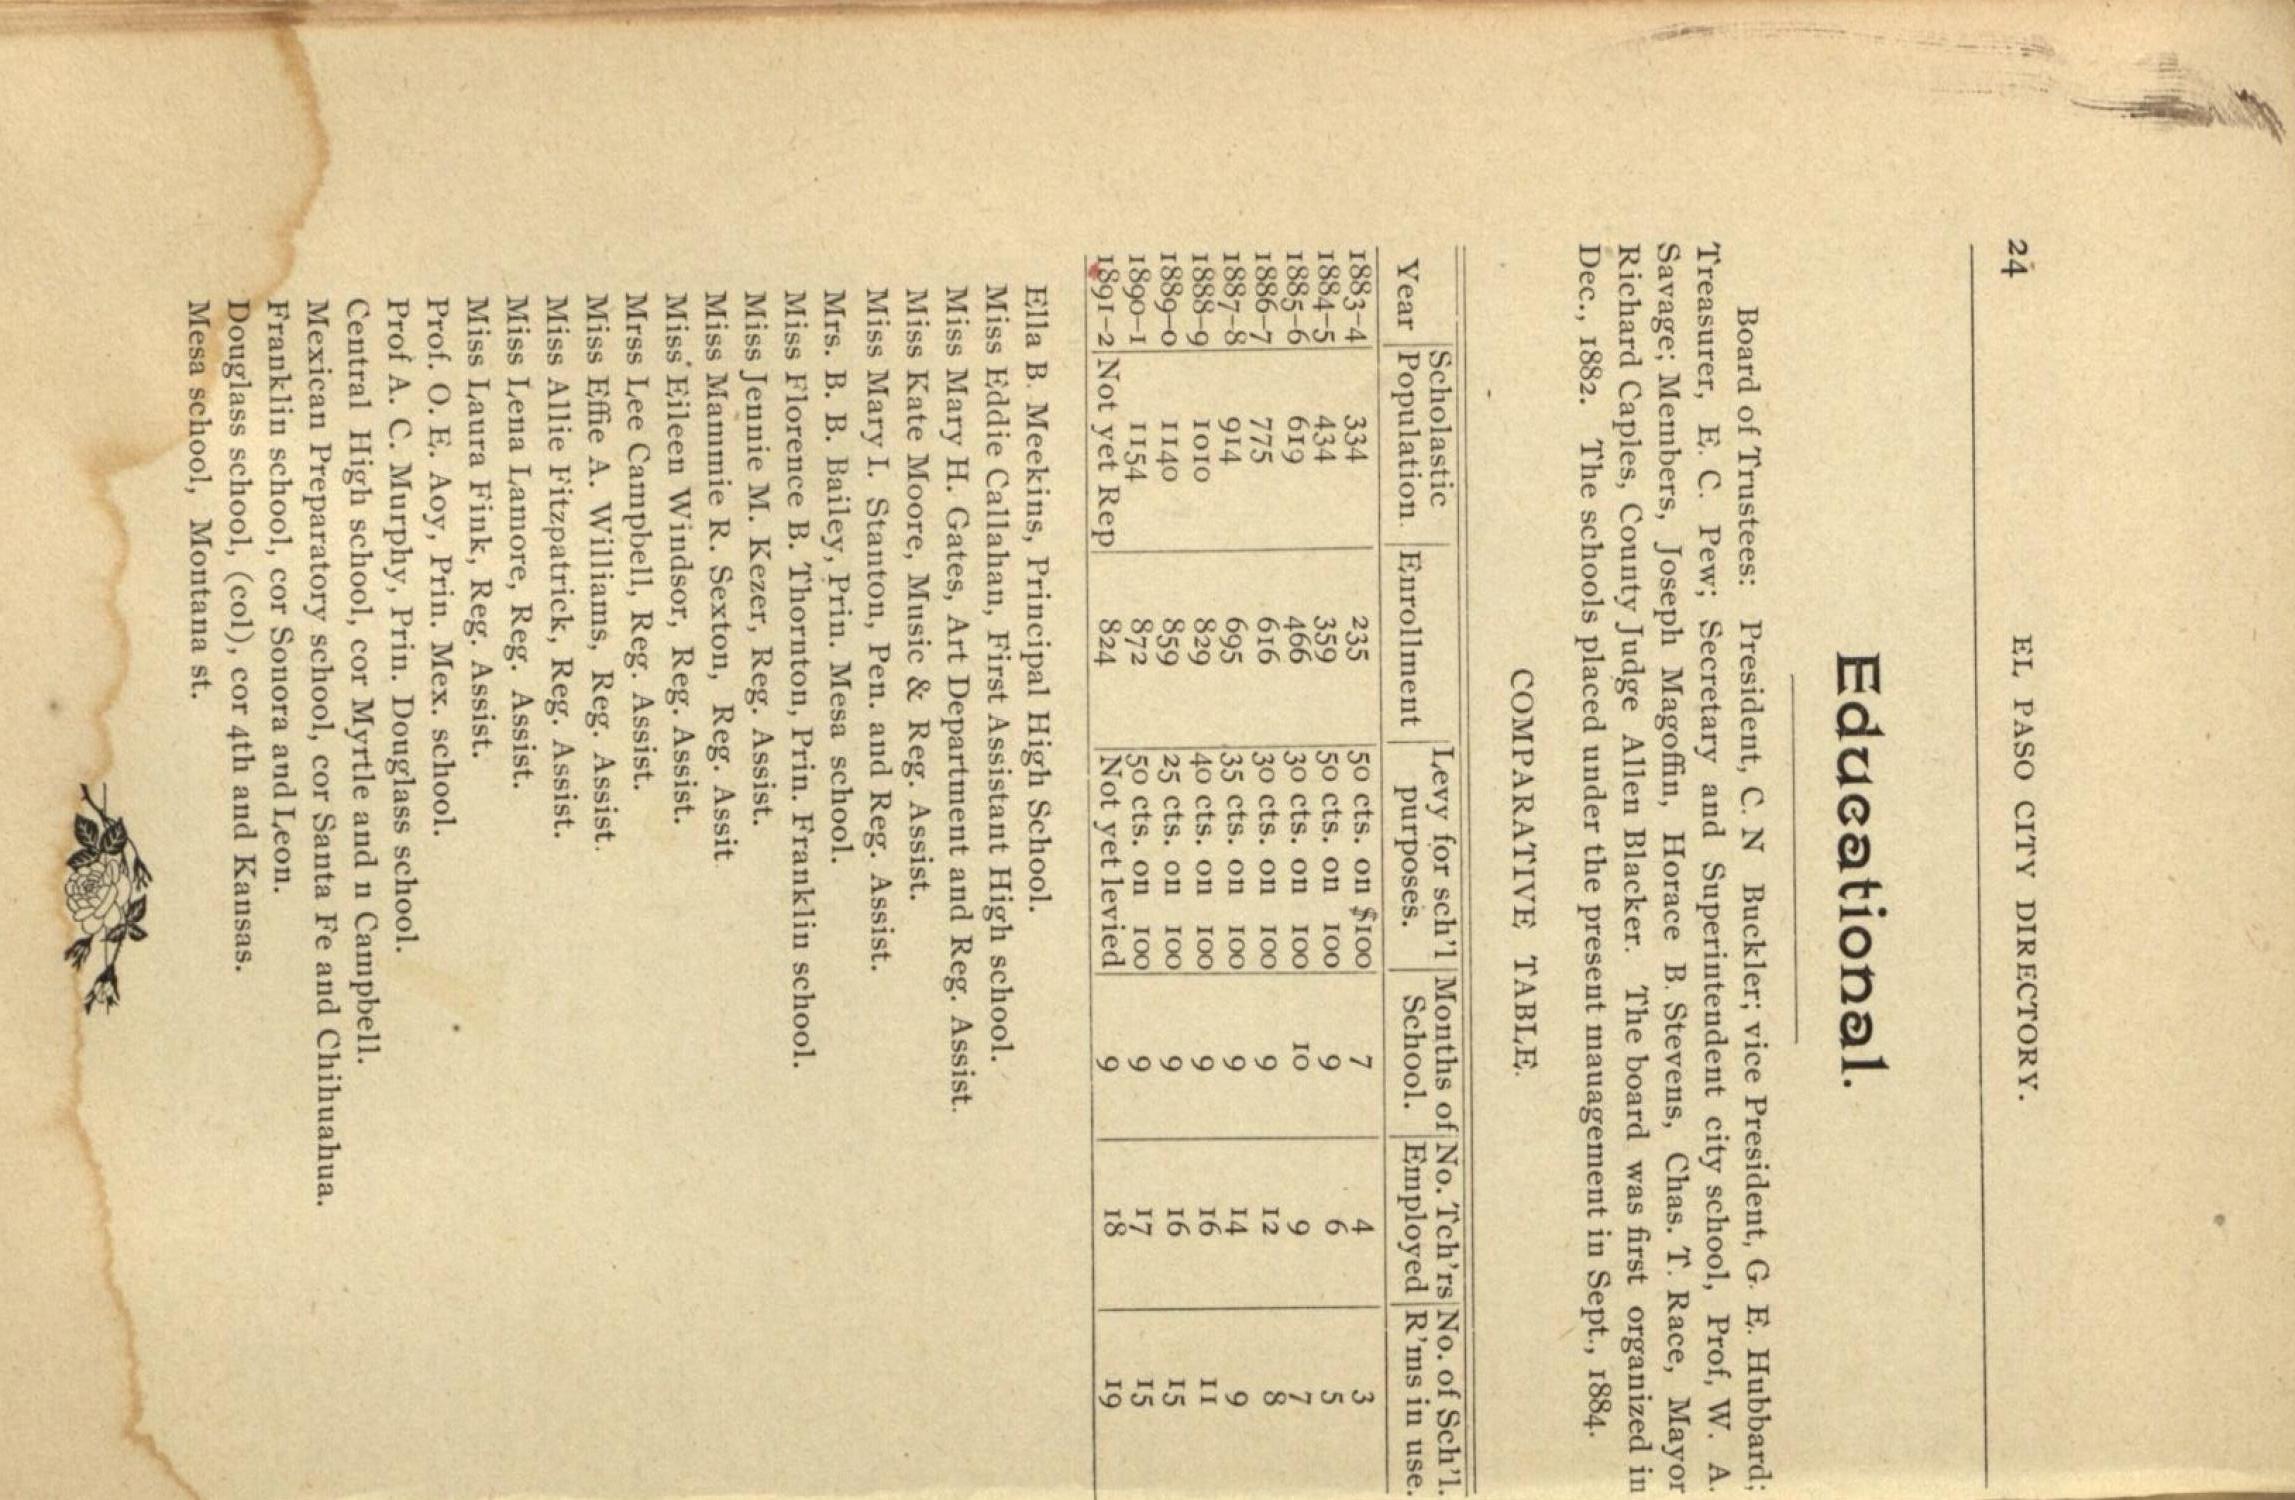 Classified Business Directory of the Cities of El Paso, Texas and Cuidad Juarez, Mexico for the years 1892 and 1893
                                                
                                                    24
                                                